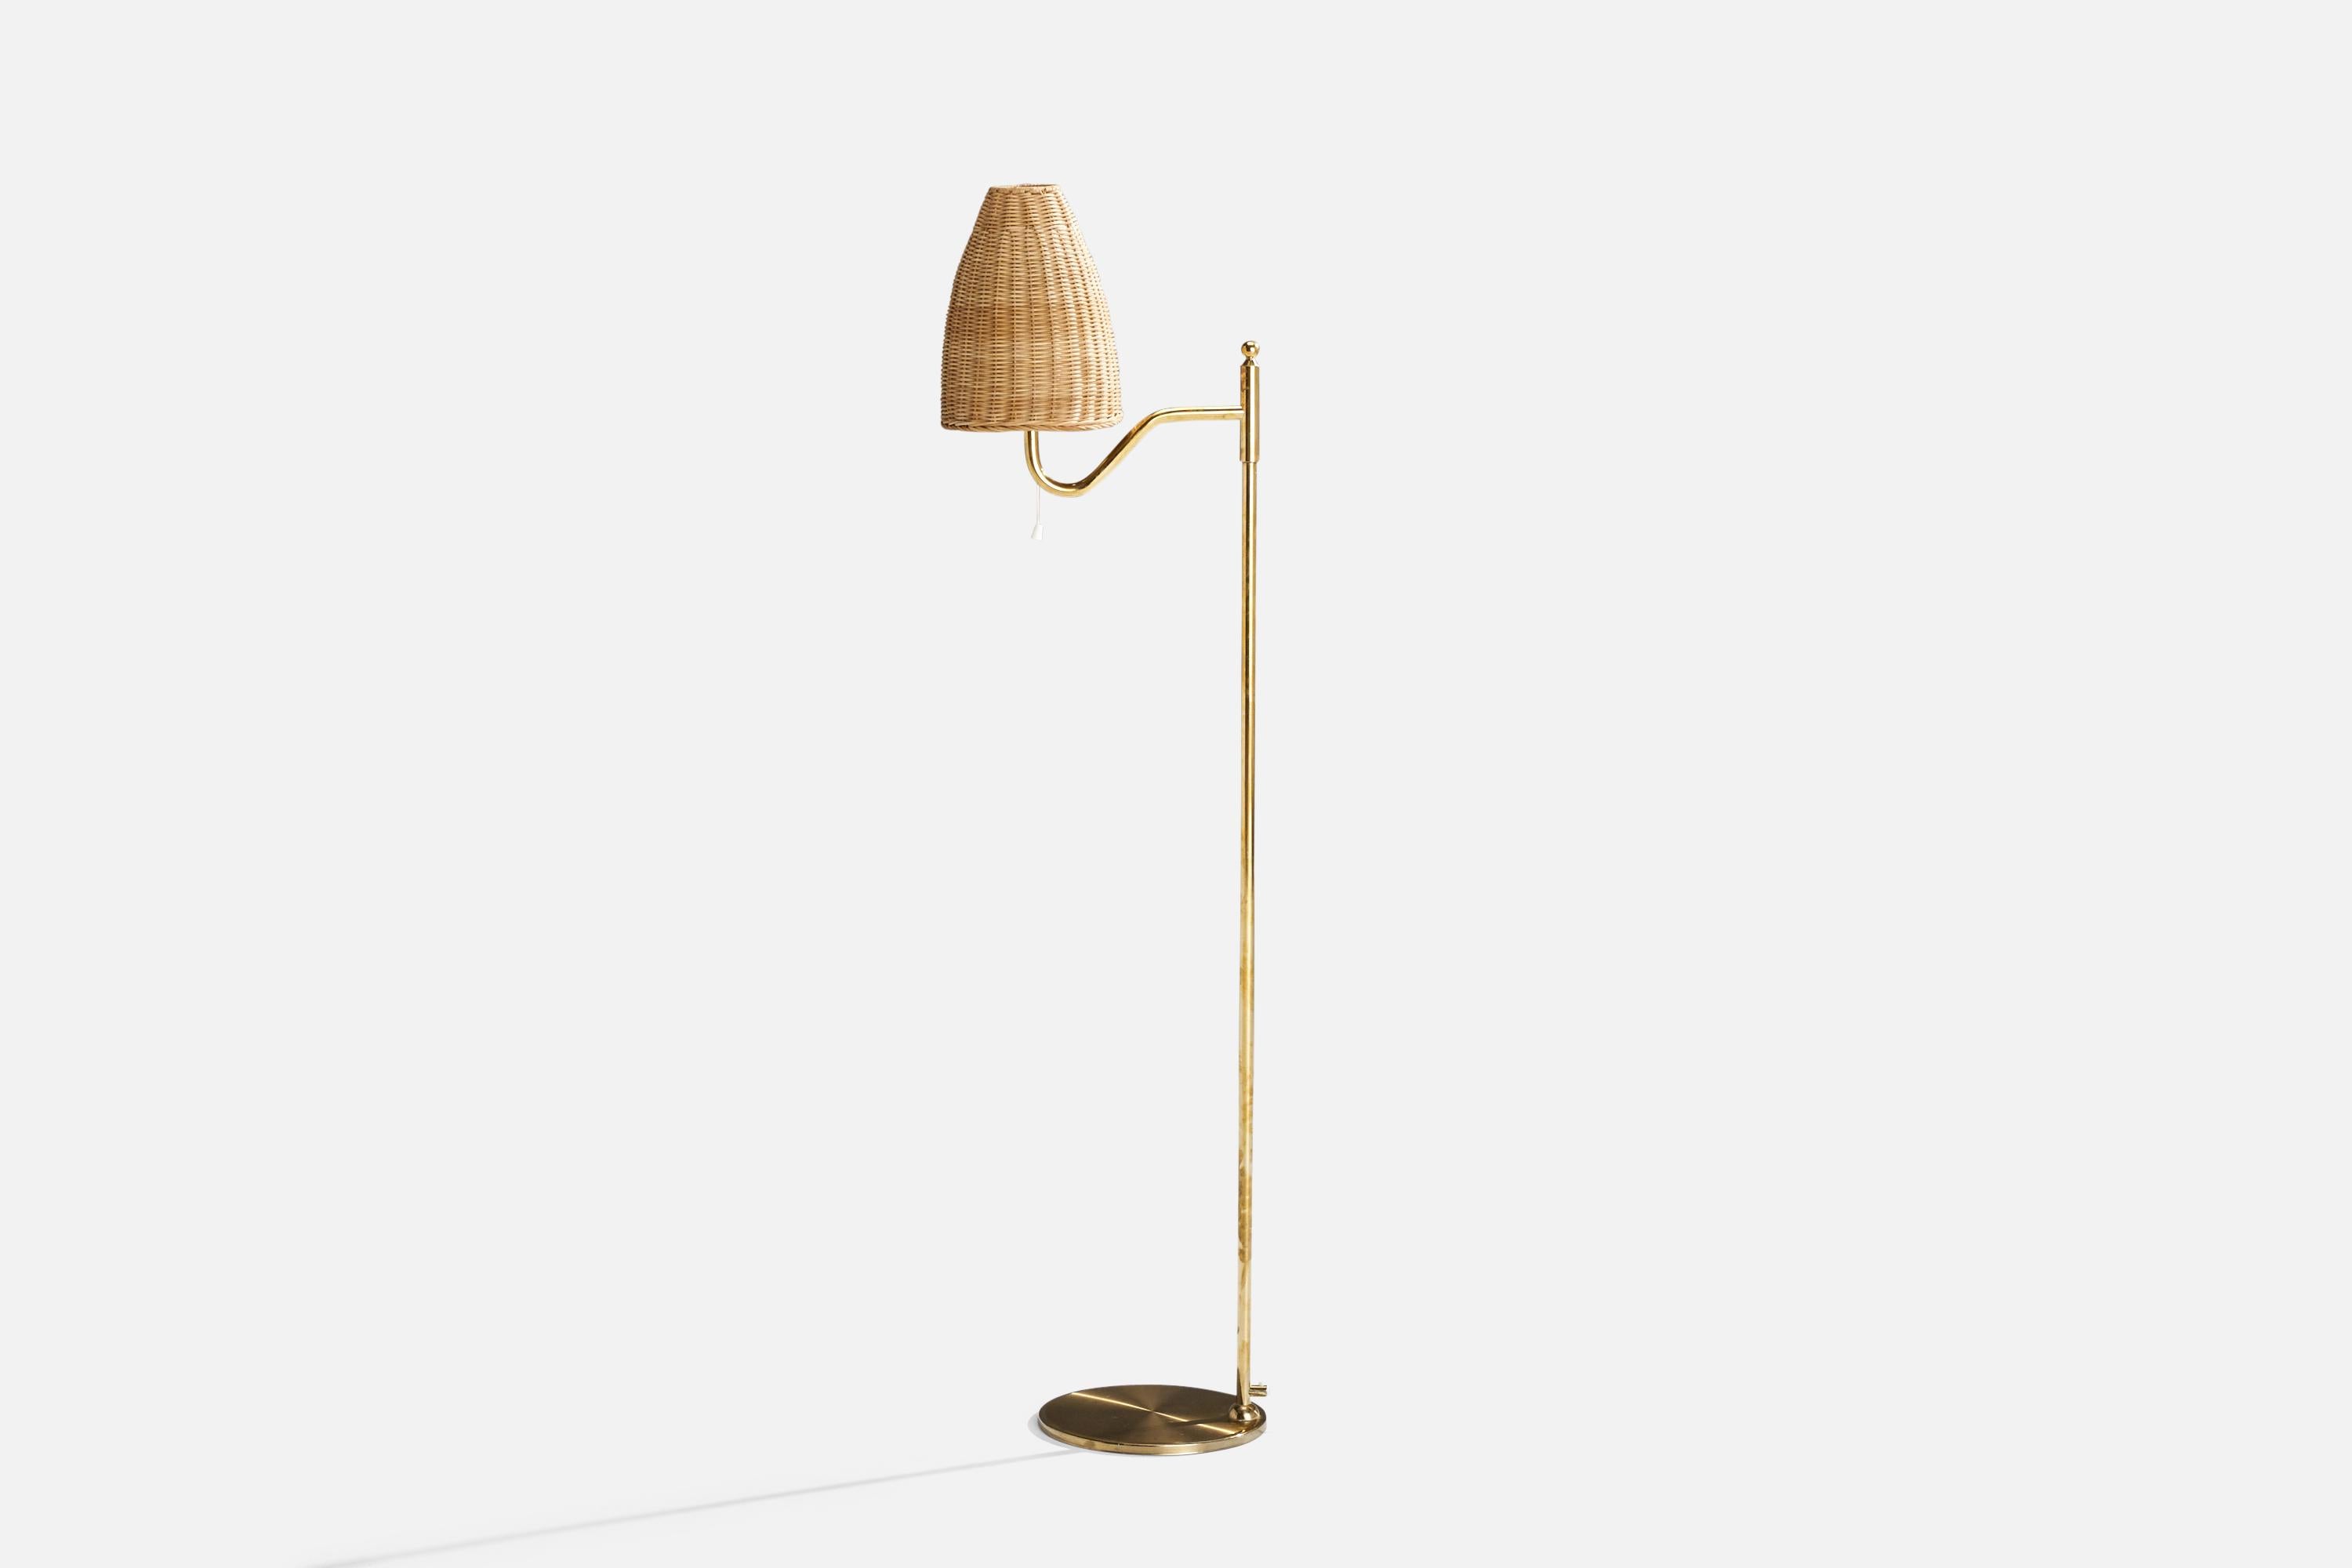 A brass and rattan floor lamp designed and produced by Nya Öia, Sweden, 1970s.

Overall Dimensions (inches): 51.75” H x 7.5” W x 15.875” D
Stated dimensions include shade.
Bulb Specifications: E-26 Bulb
Number of Sockets: 1
All lighting will be